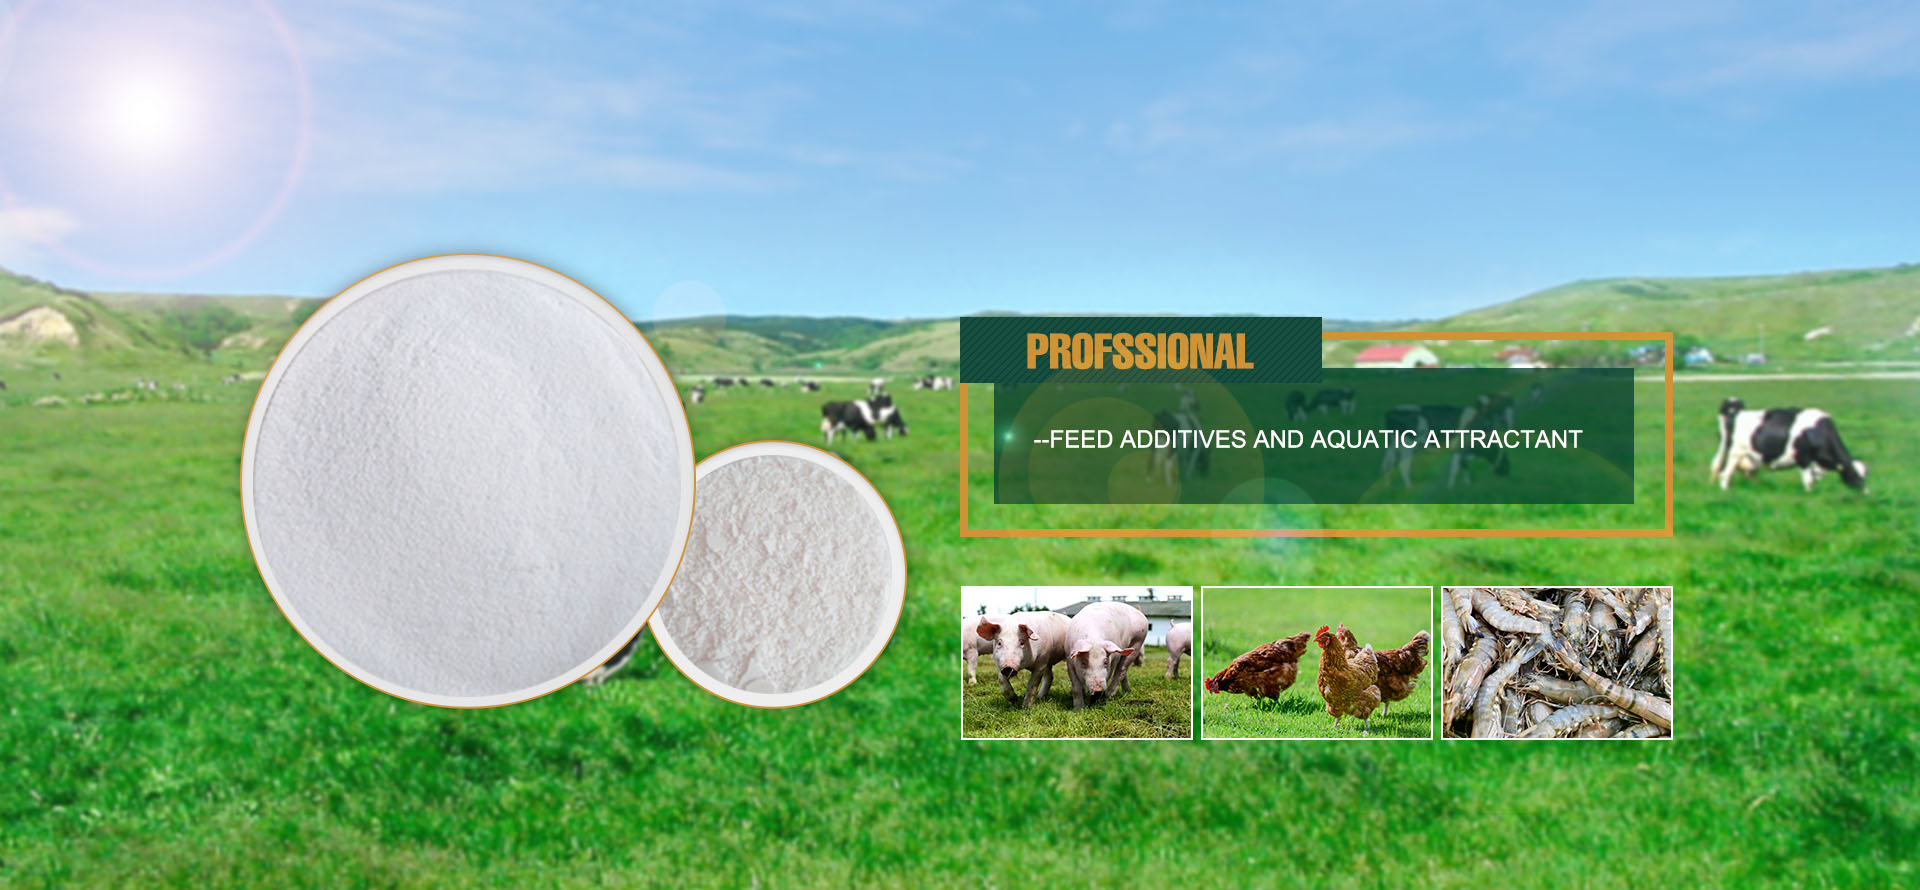 Aditif Feed AND ATTRACTANT akuatik